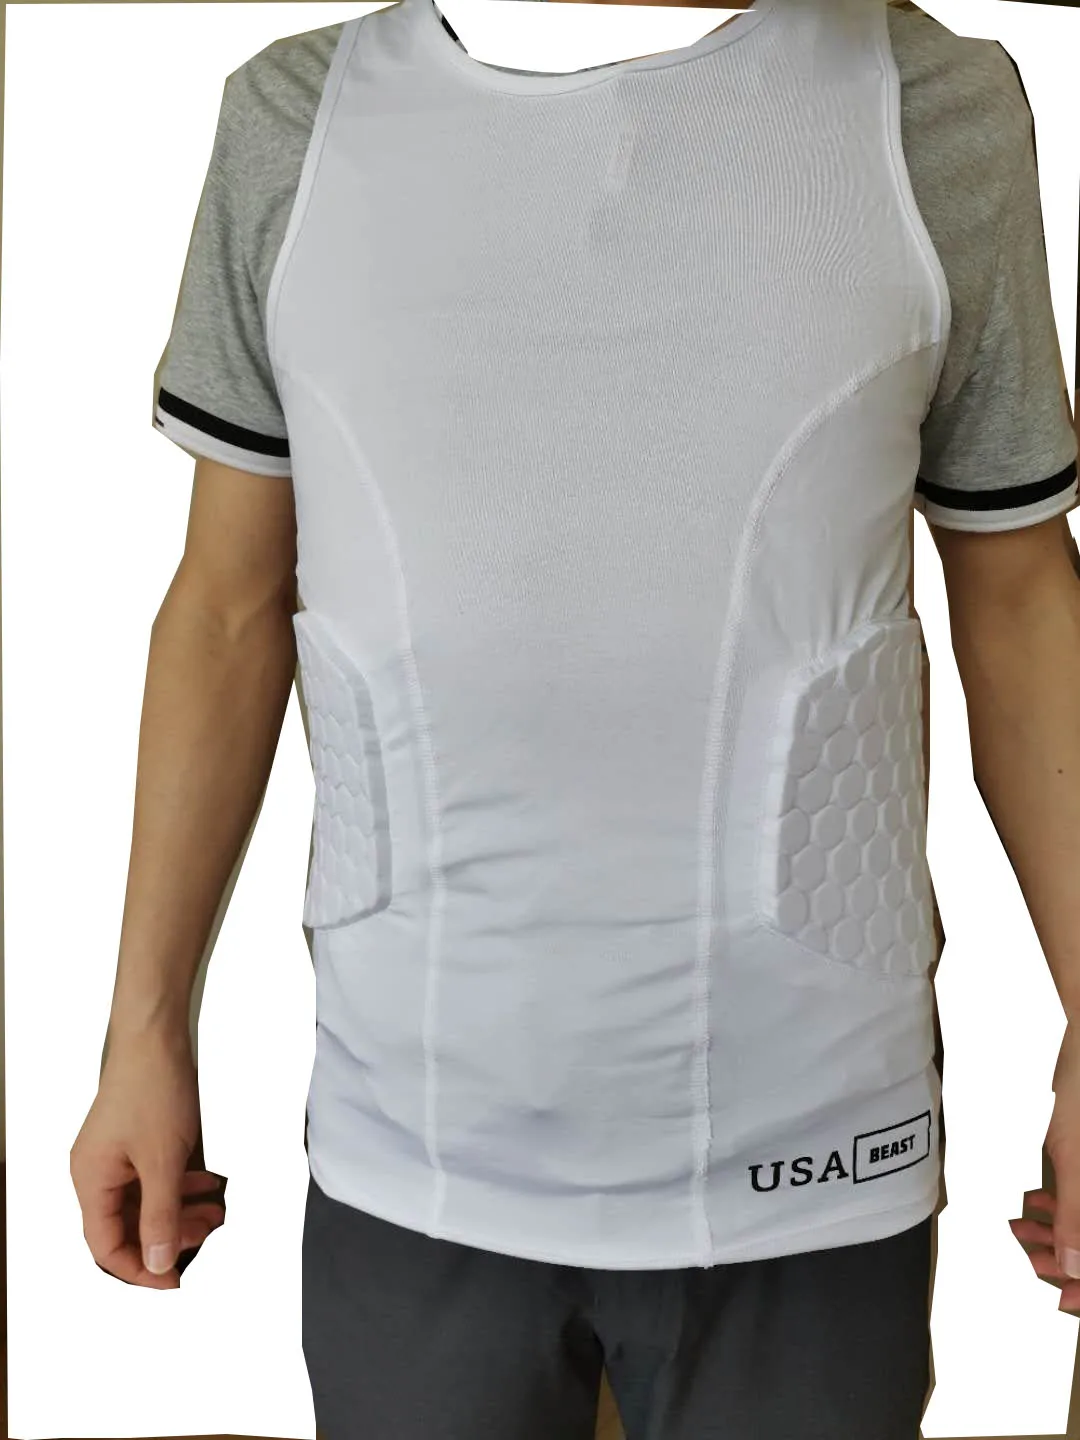 Padded Compression Shirt Chest Protector Undershirt For Football Soccer  Paintball Shirt 